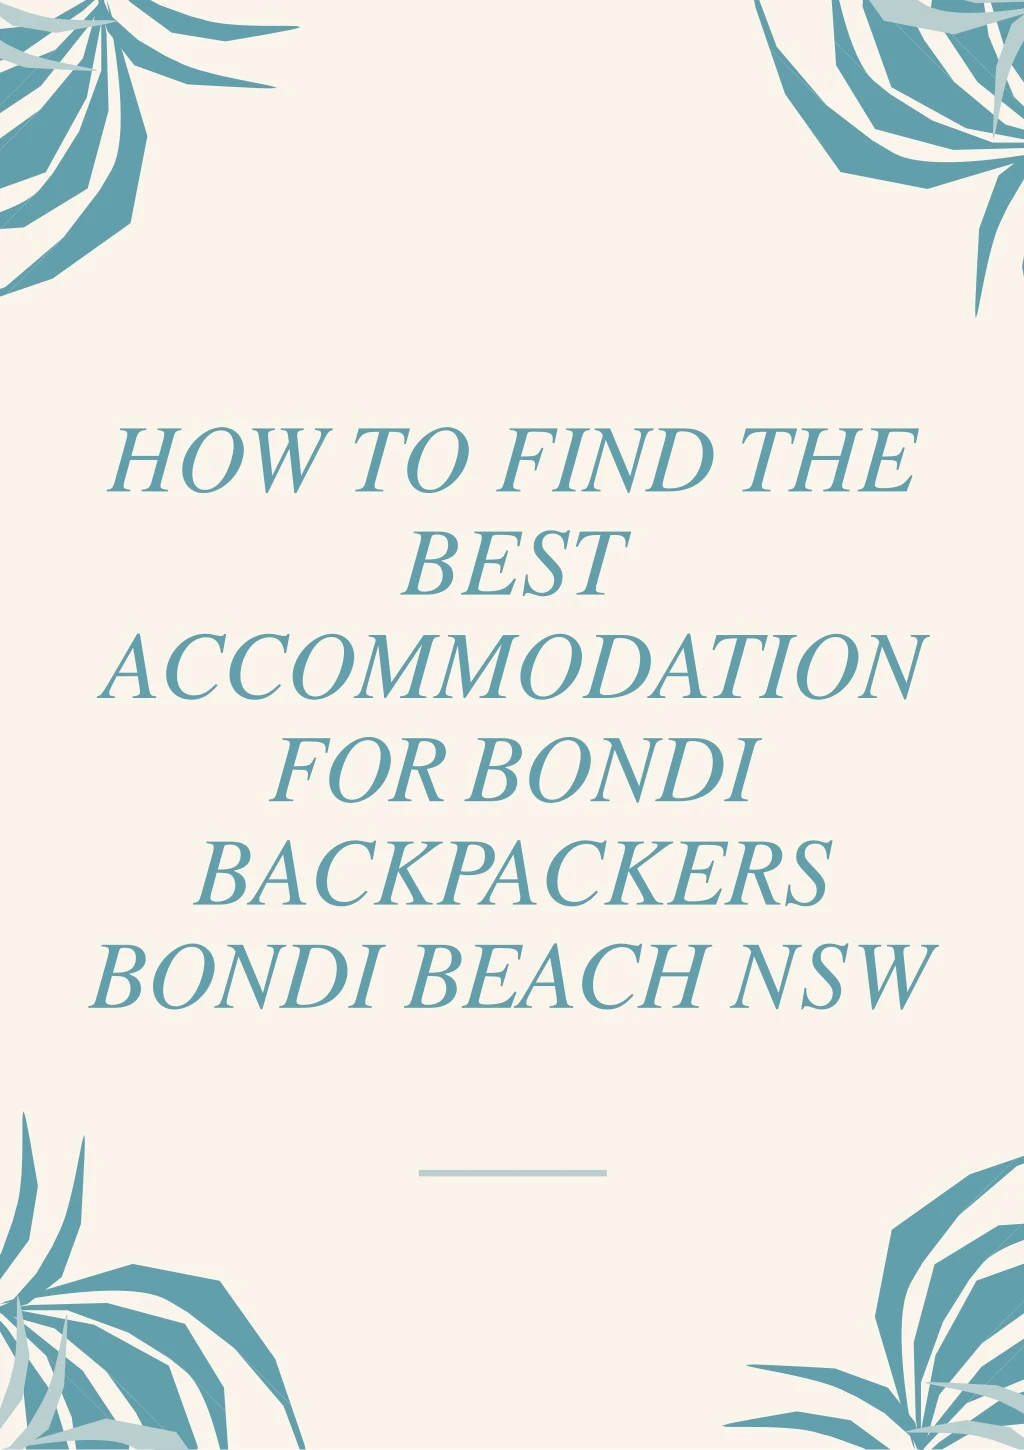 how to find the best accommodation for bondi